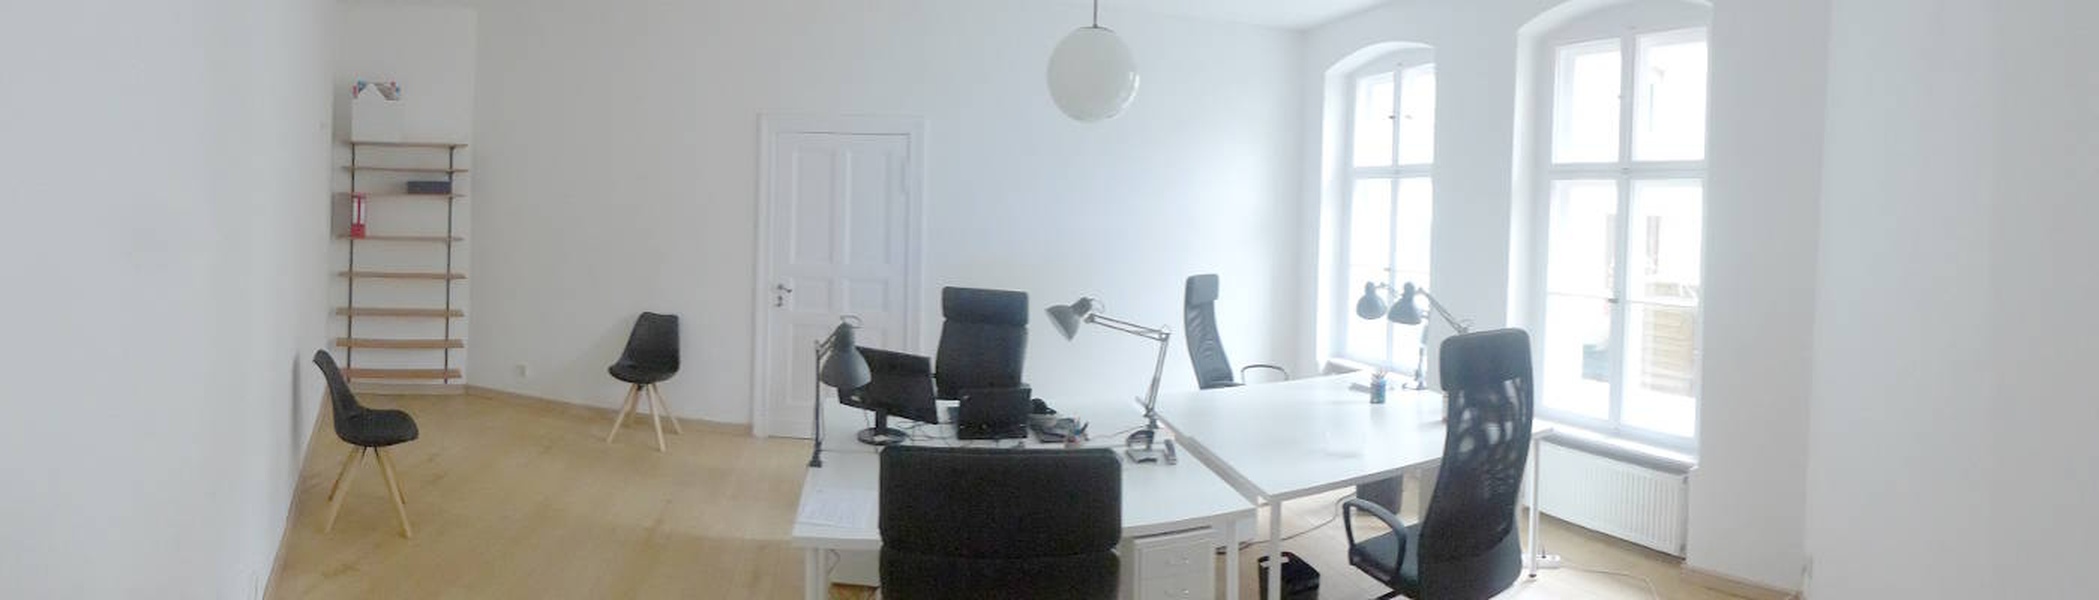 CoWorking office close to Rathaus Pankow